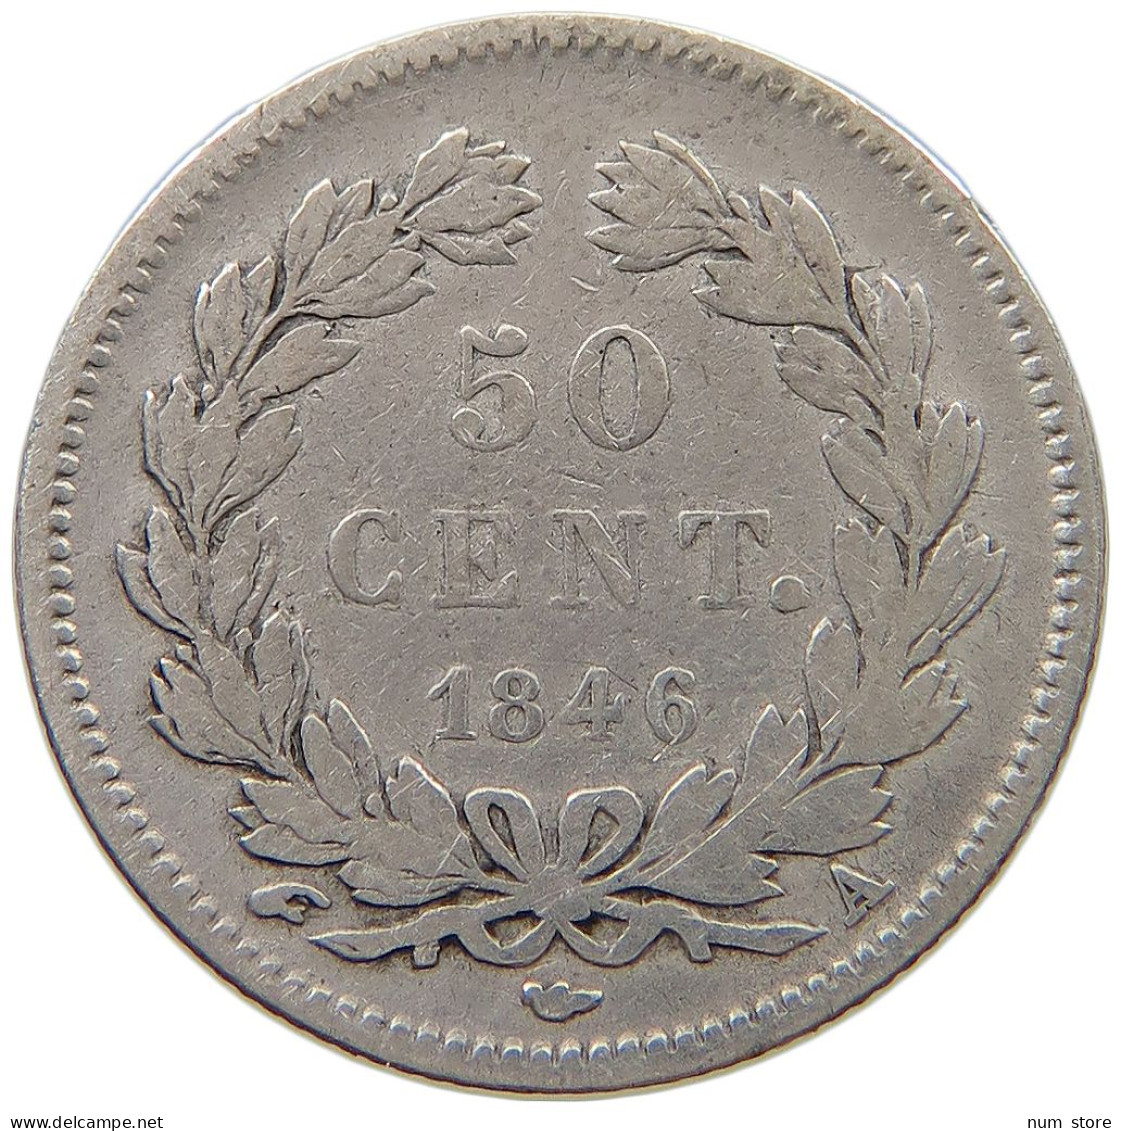 FRANCE 50 CENTIMES 1846 A LOUIS PHILIPPE I. (1830-1848) #t112 0265 - 50 Centimes